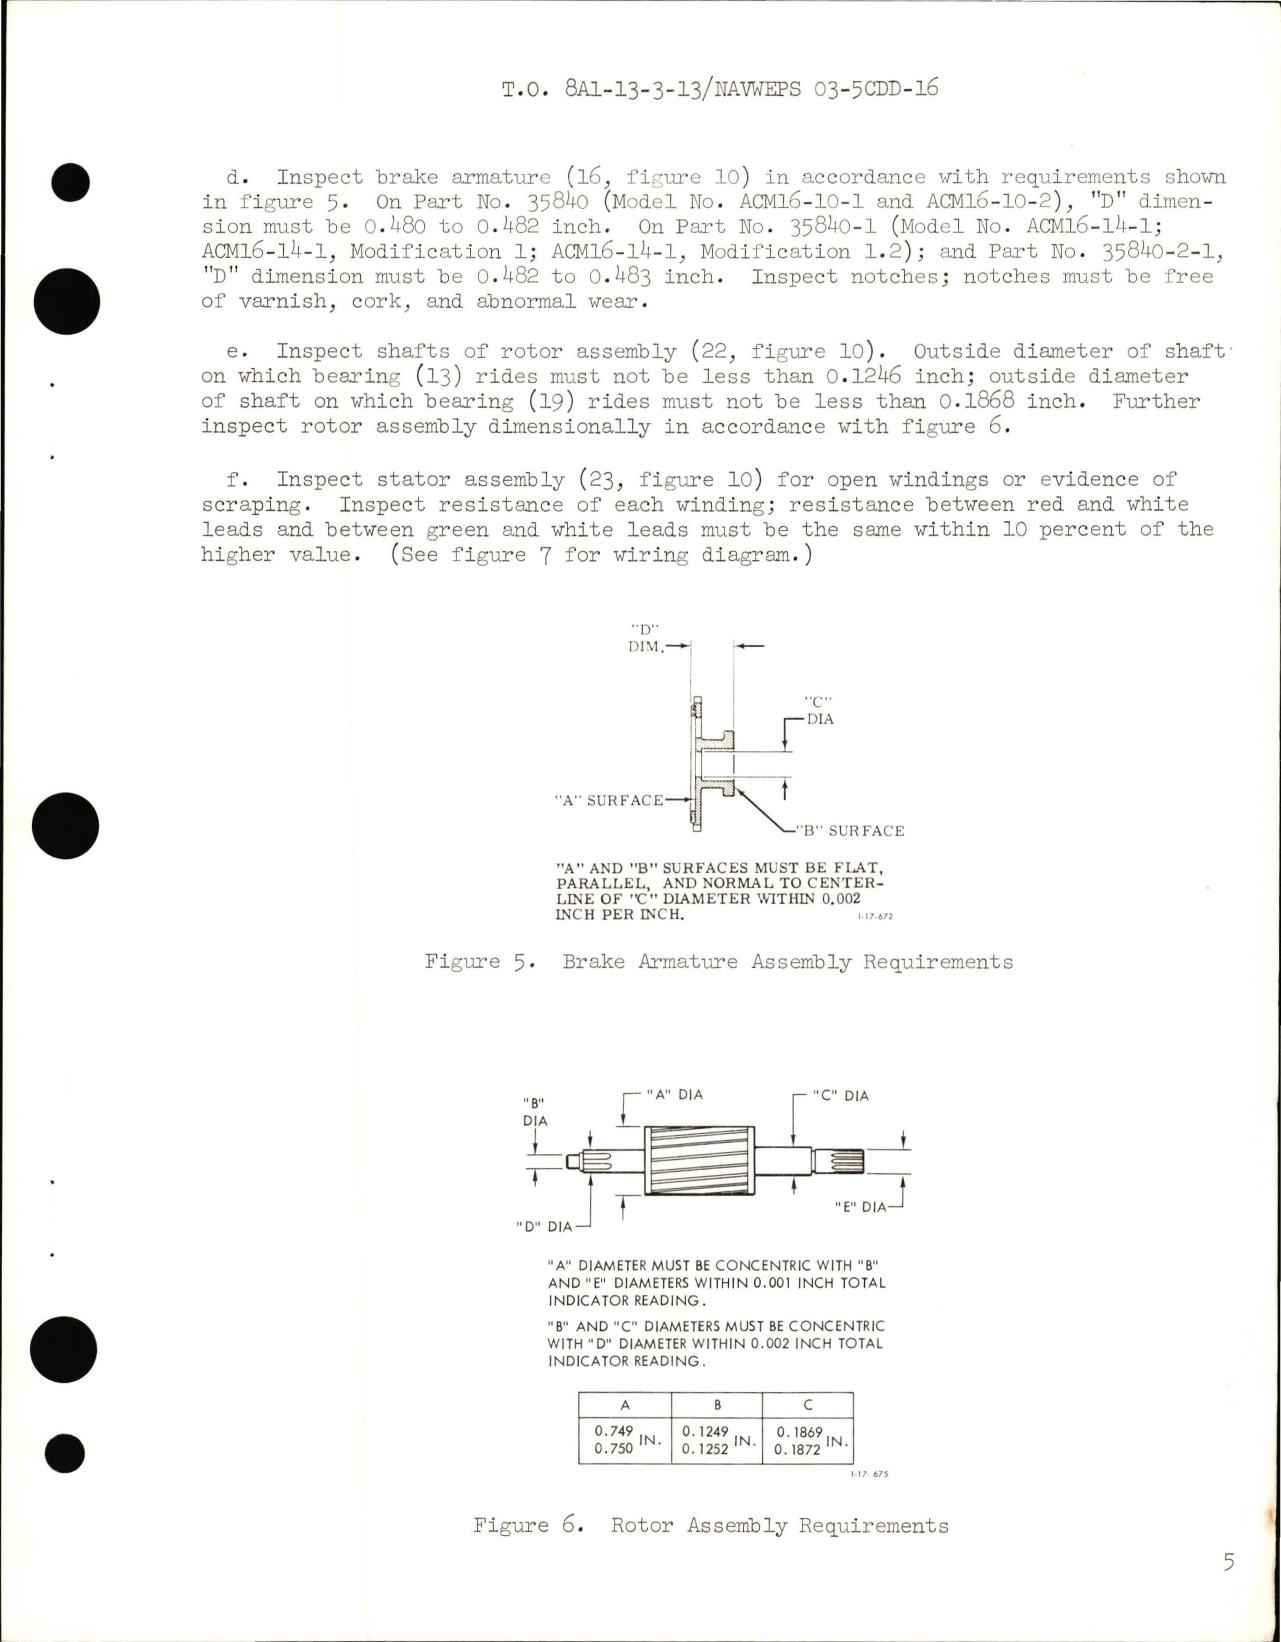 Sample page 5 from AirCorps Library document: Overhaul Instructions with Parts Breakdown for Aircraft Alternating Current Motors - Parts 35840, 35840-1 and 35840-2-1